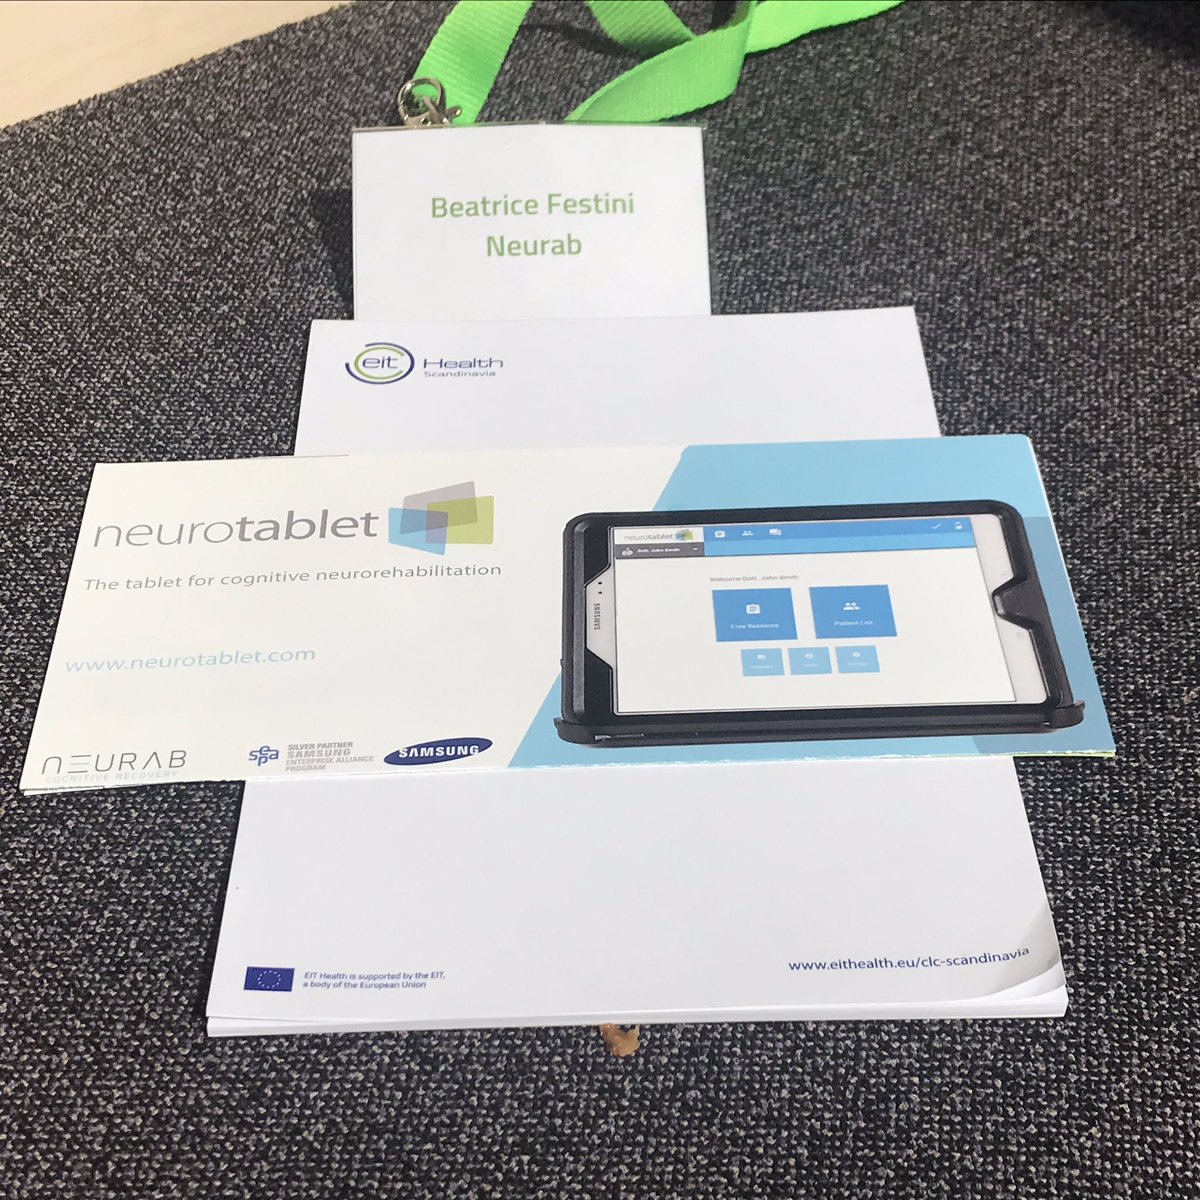 We’re excited we’ve been selected among the 15 #startups taking part to the @EITHealth #Bridgehead acceleration programme! #medtech #innovation #eu #karolinskainstitute #matchmaking